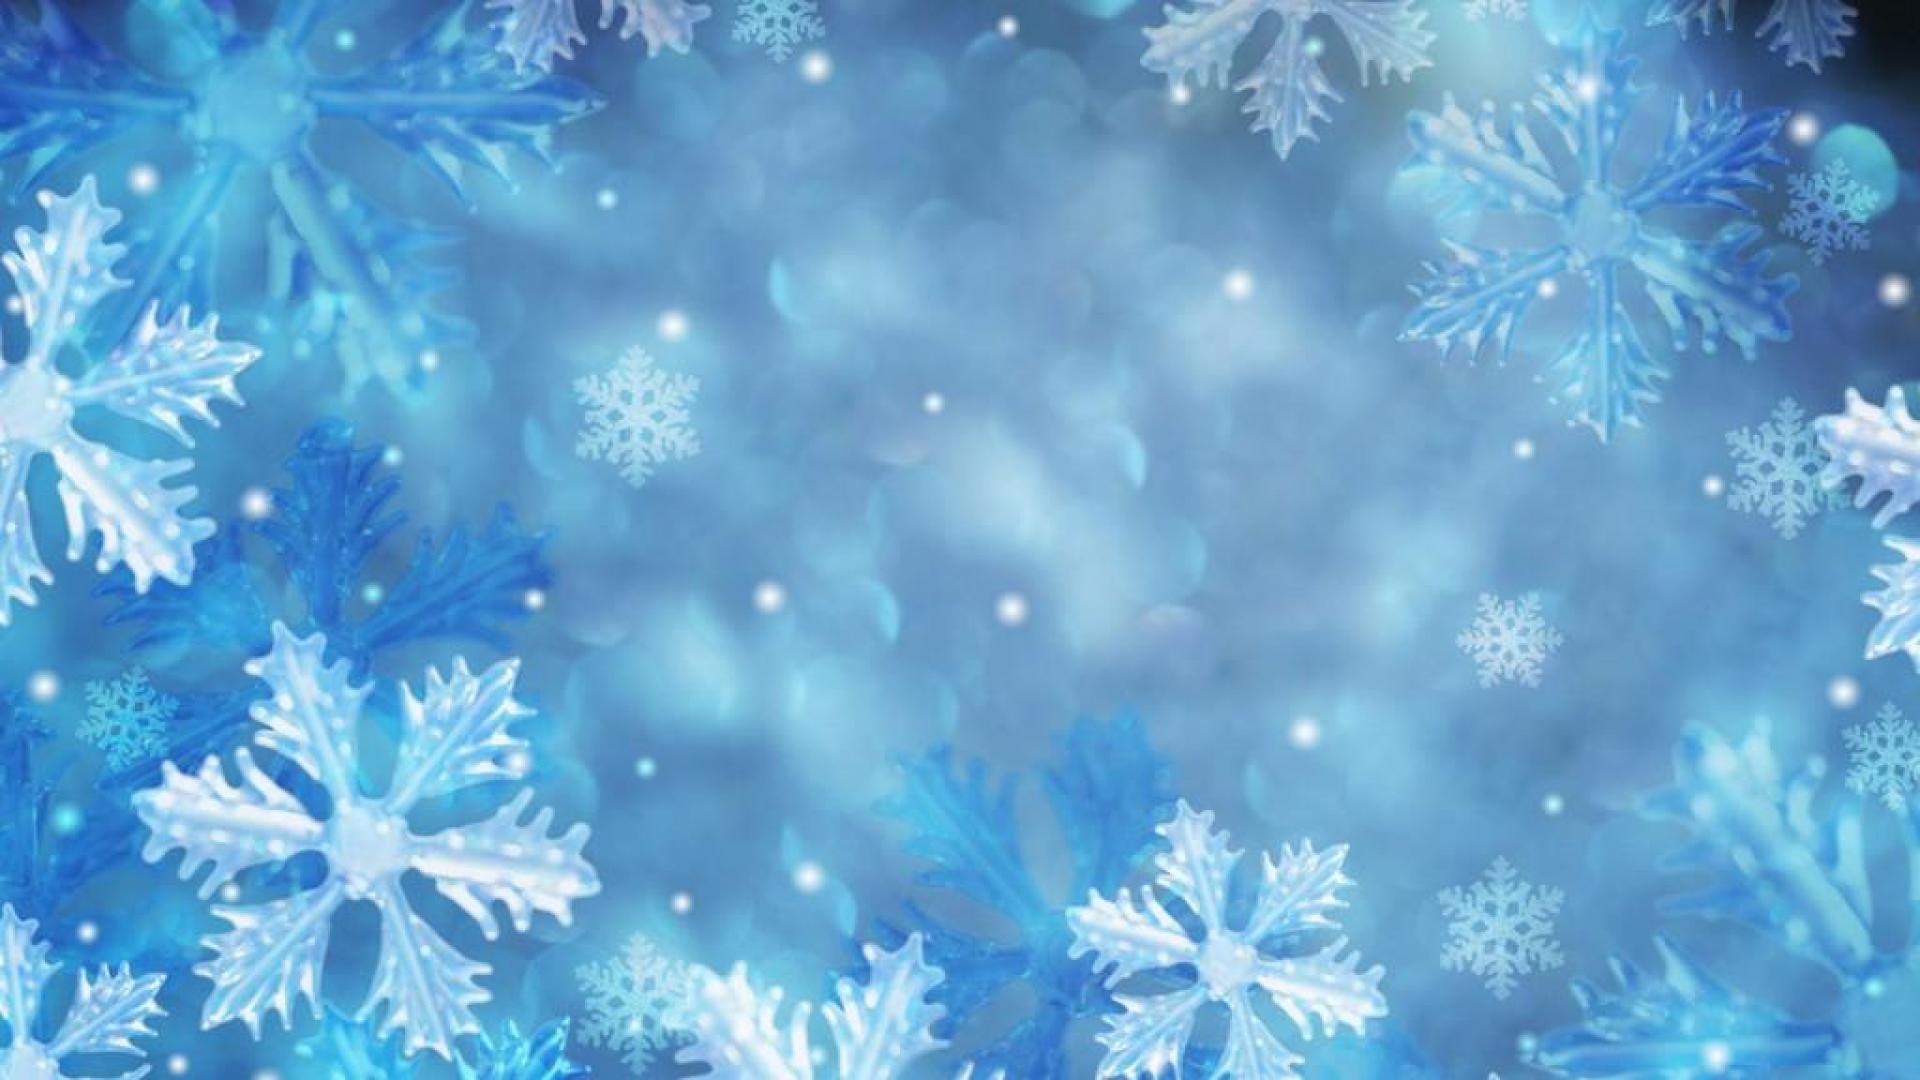 Icy snowflakes - (#70788) - High Quality and Resolution Wallpapers ...